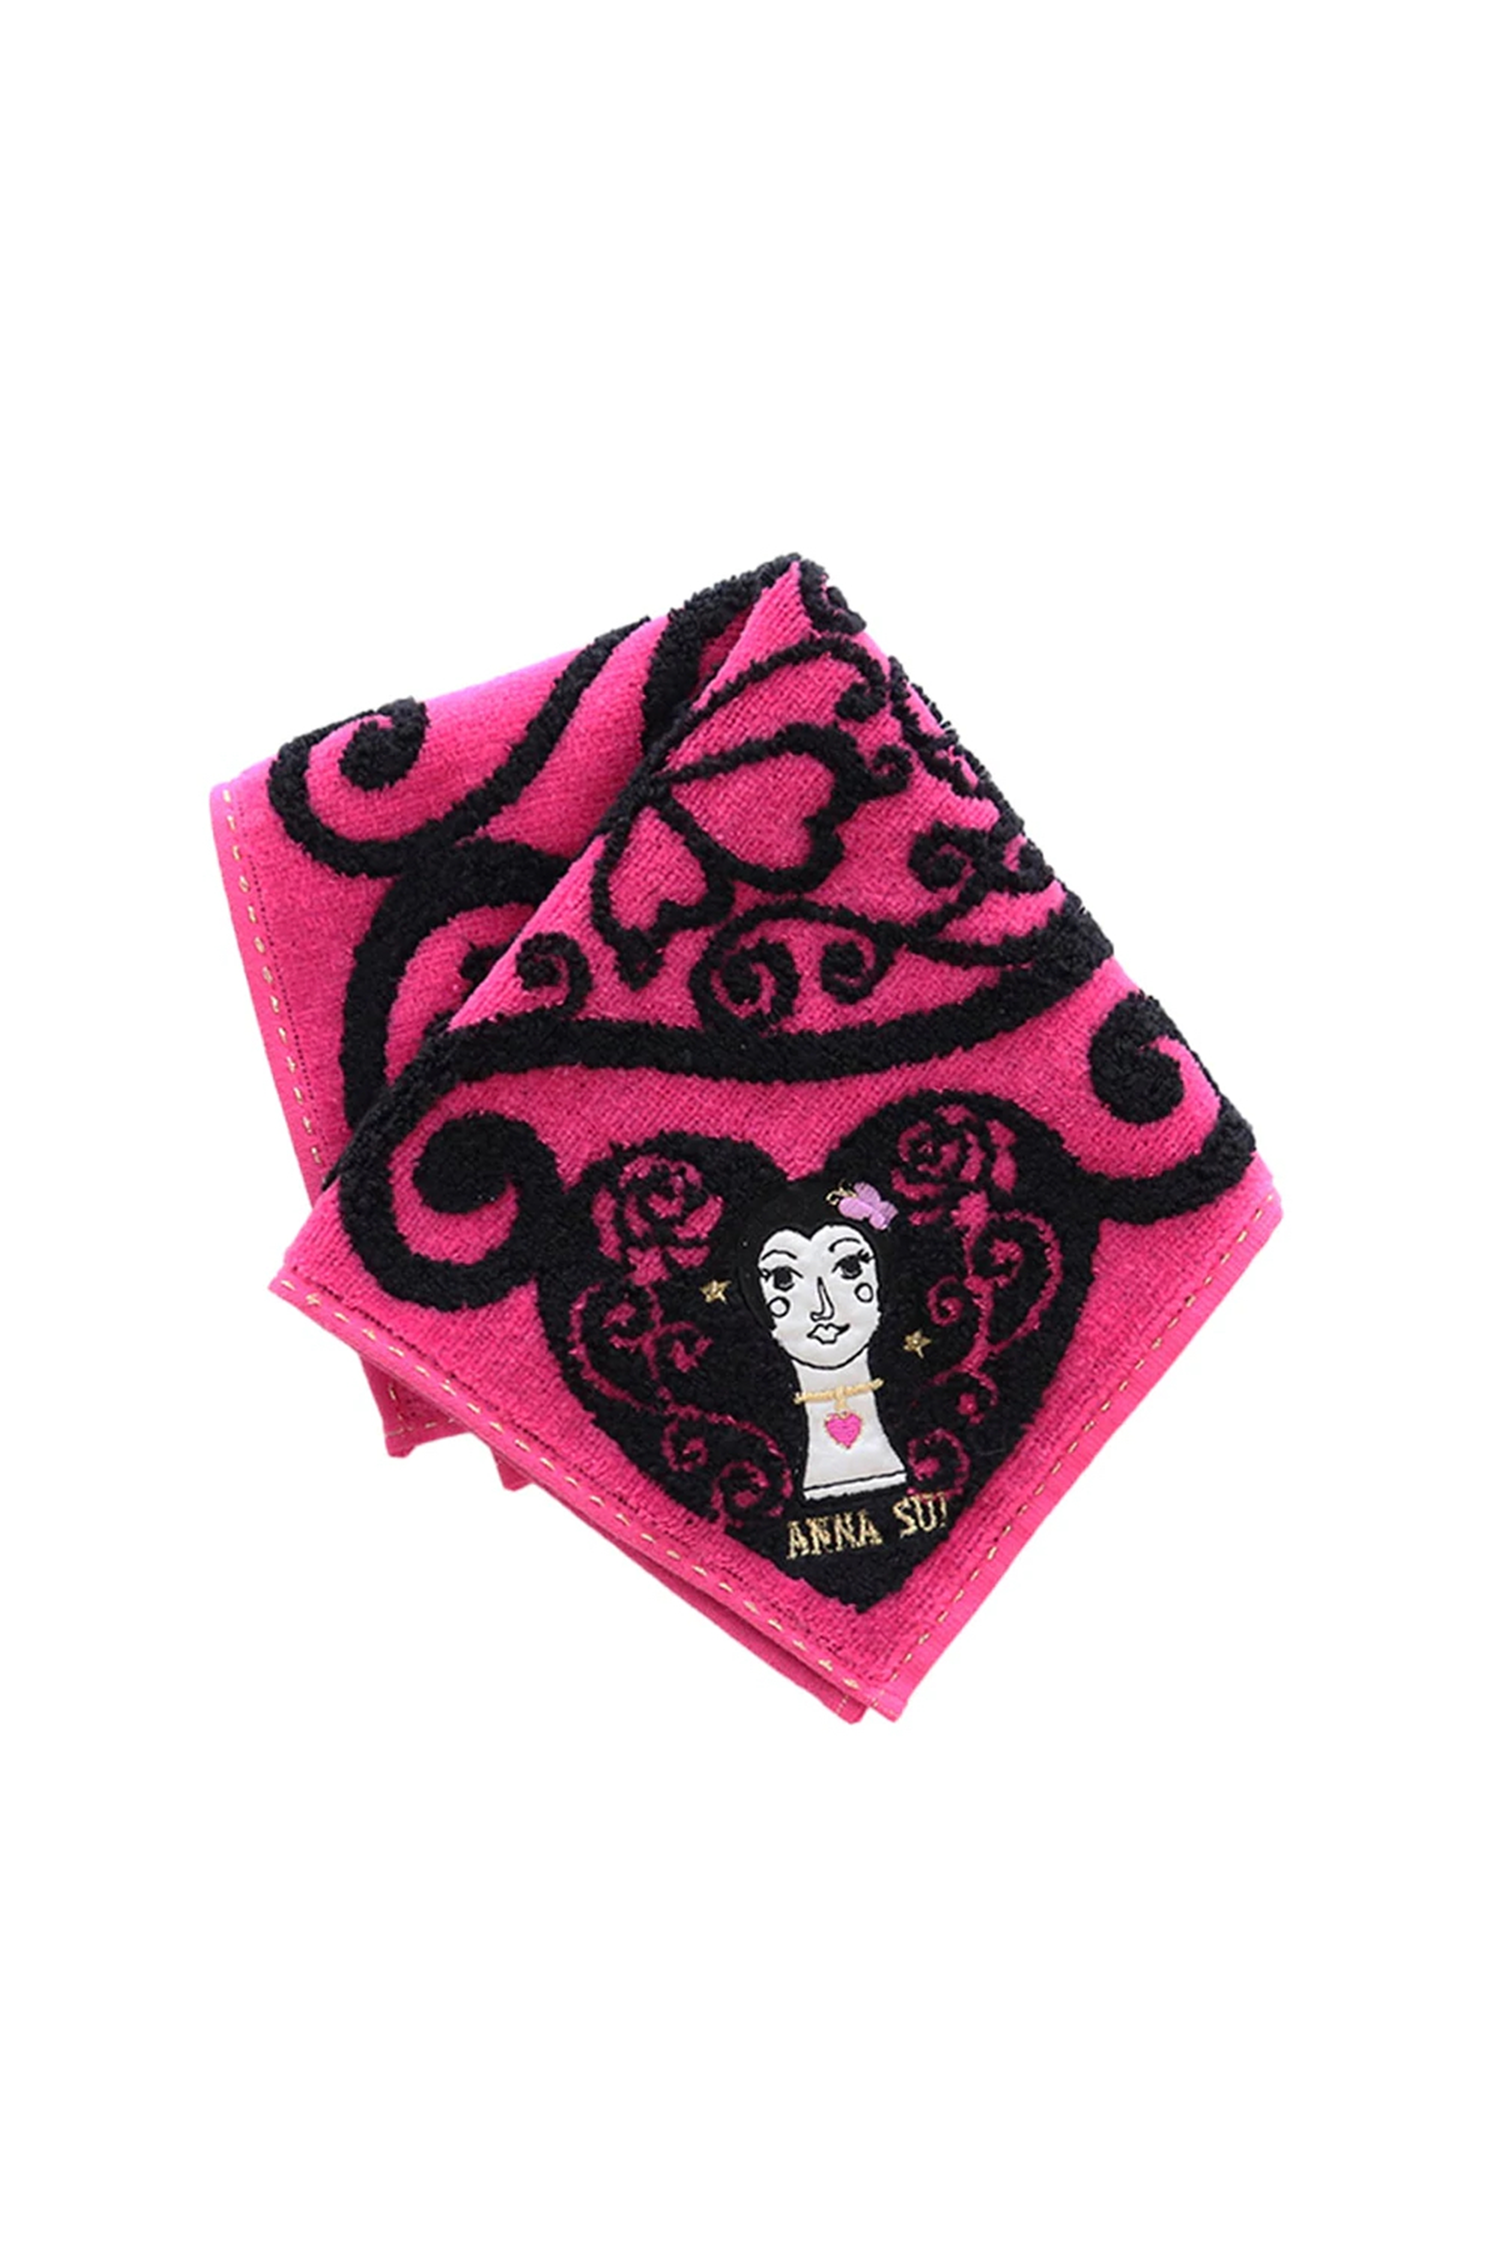 Dolly Head Washcloth, red, embroidery black heart in corners with and Anna Sui’s doll inside